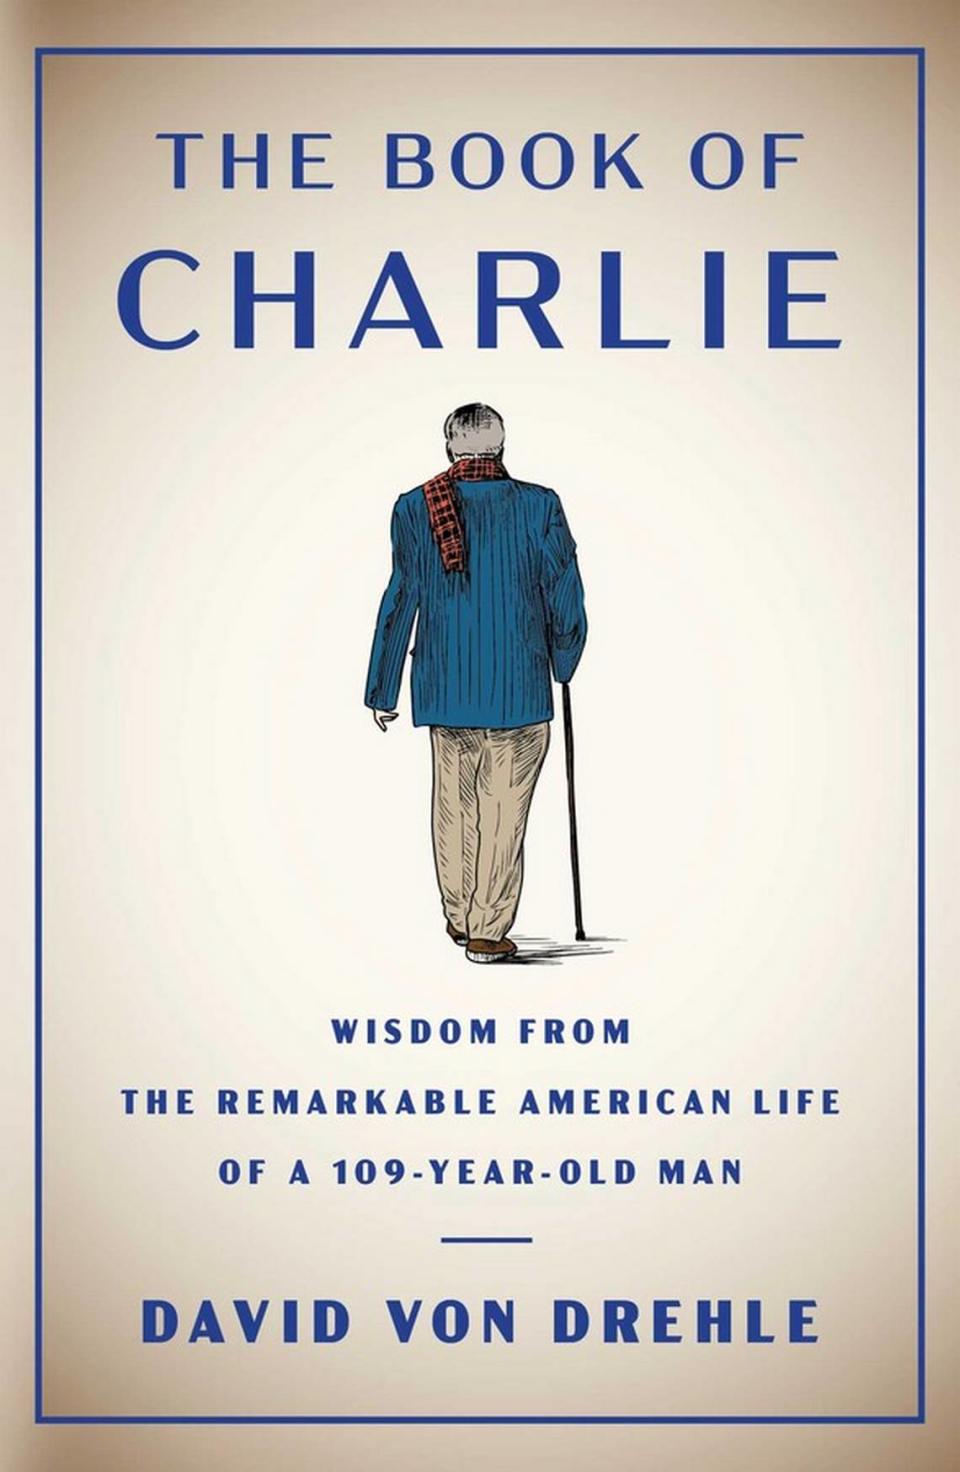 “The Book of Charlie: Wisdom From the Remarkable American Life of a 109-Year-Old Man” by David Von Drehle will be released May 23.